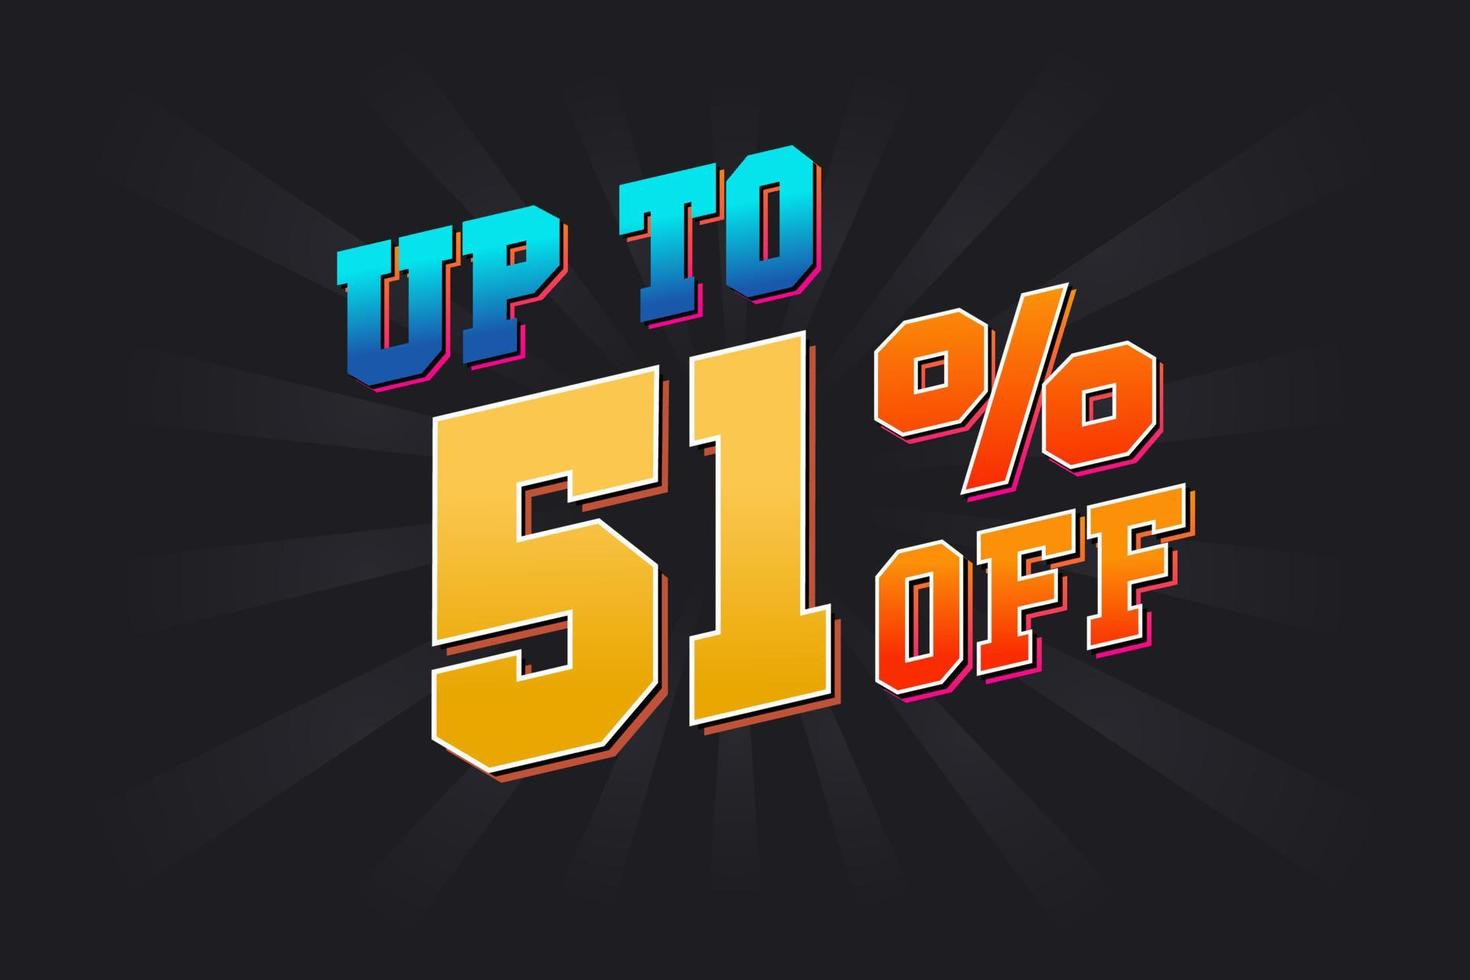 Up To 51 Percent off Special Discount Offer. Upto 51 off Sale of advertising campaign vector graphics.